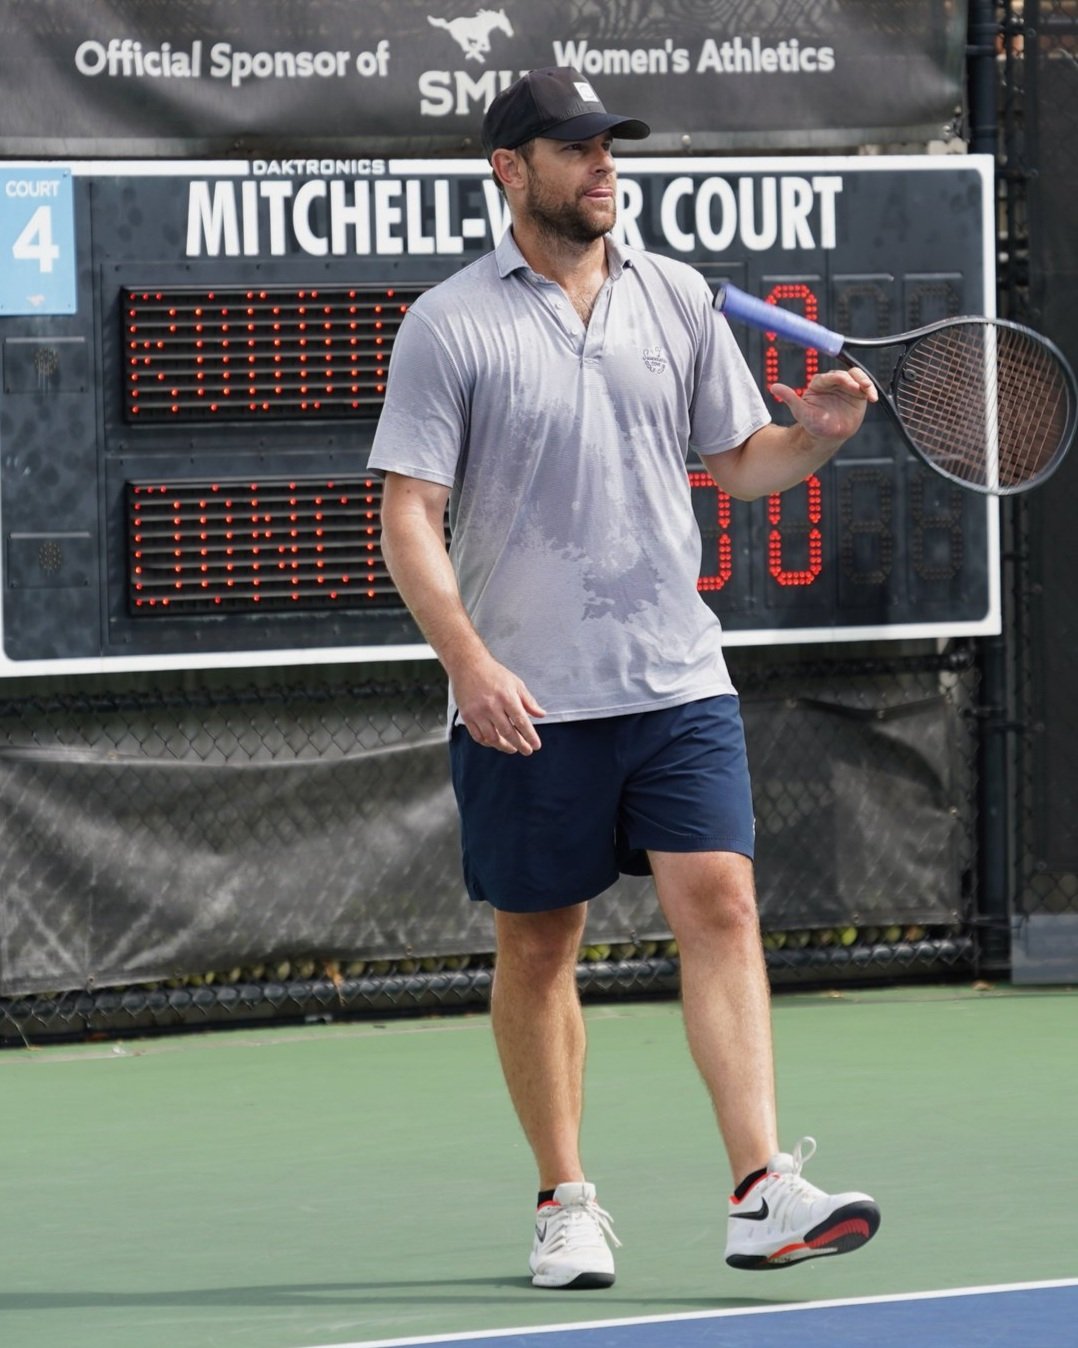   Andy Roddick , former tennis pro, 2003 US Open champion and the last American man to finish No. 1 in the ATP World Tour Rankings  